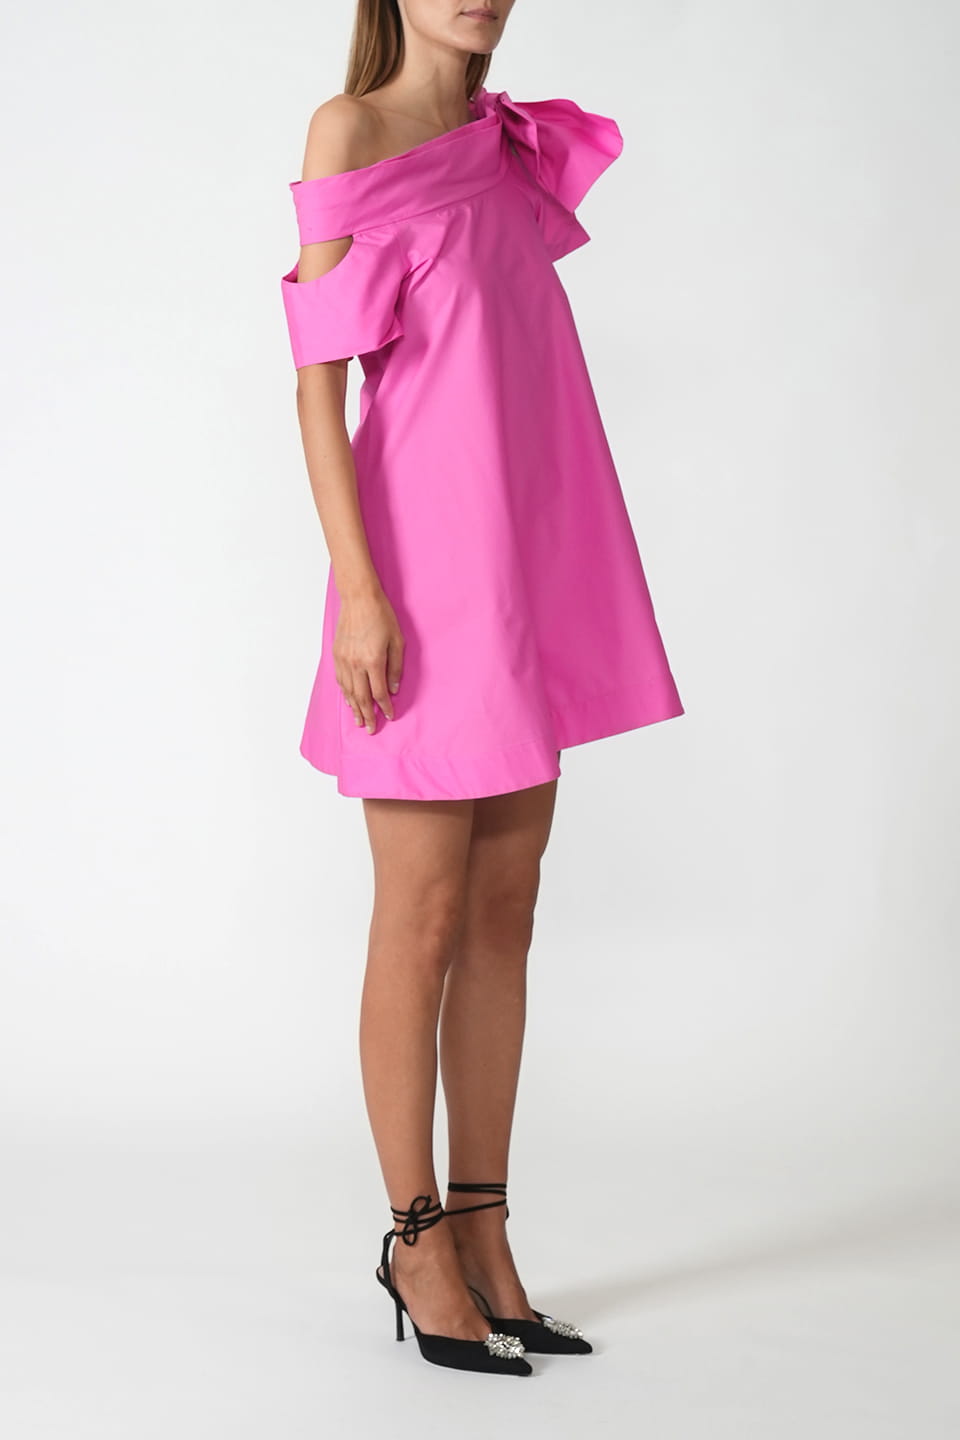 Designer Pink Mini dresses, shop online with free delivery in UAE. Product gallery 3